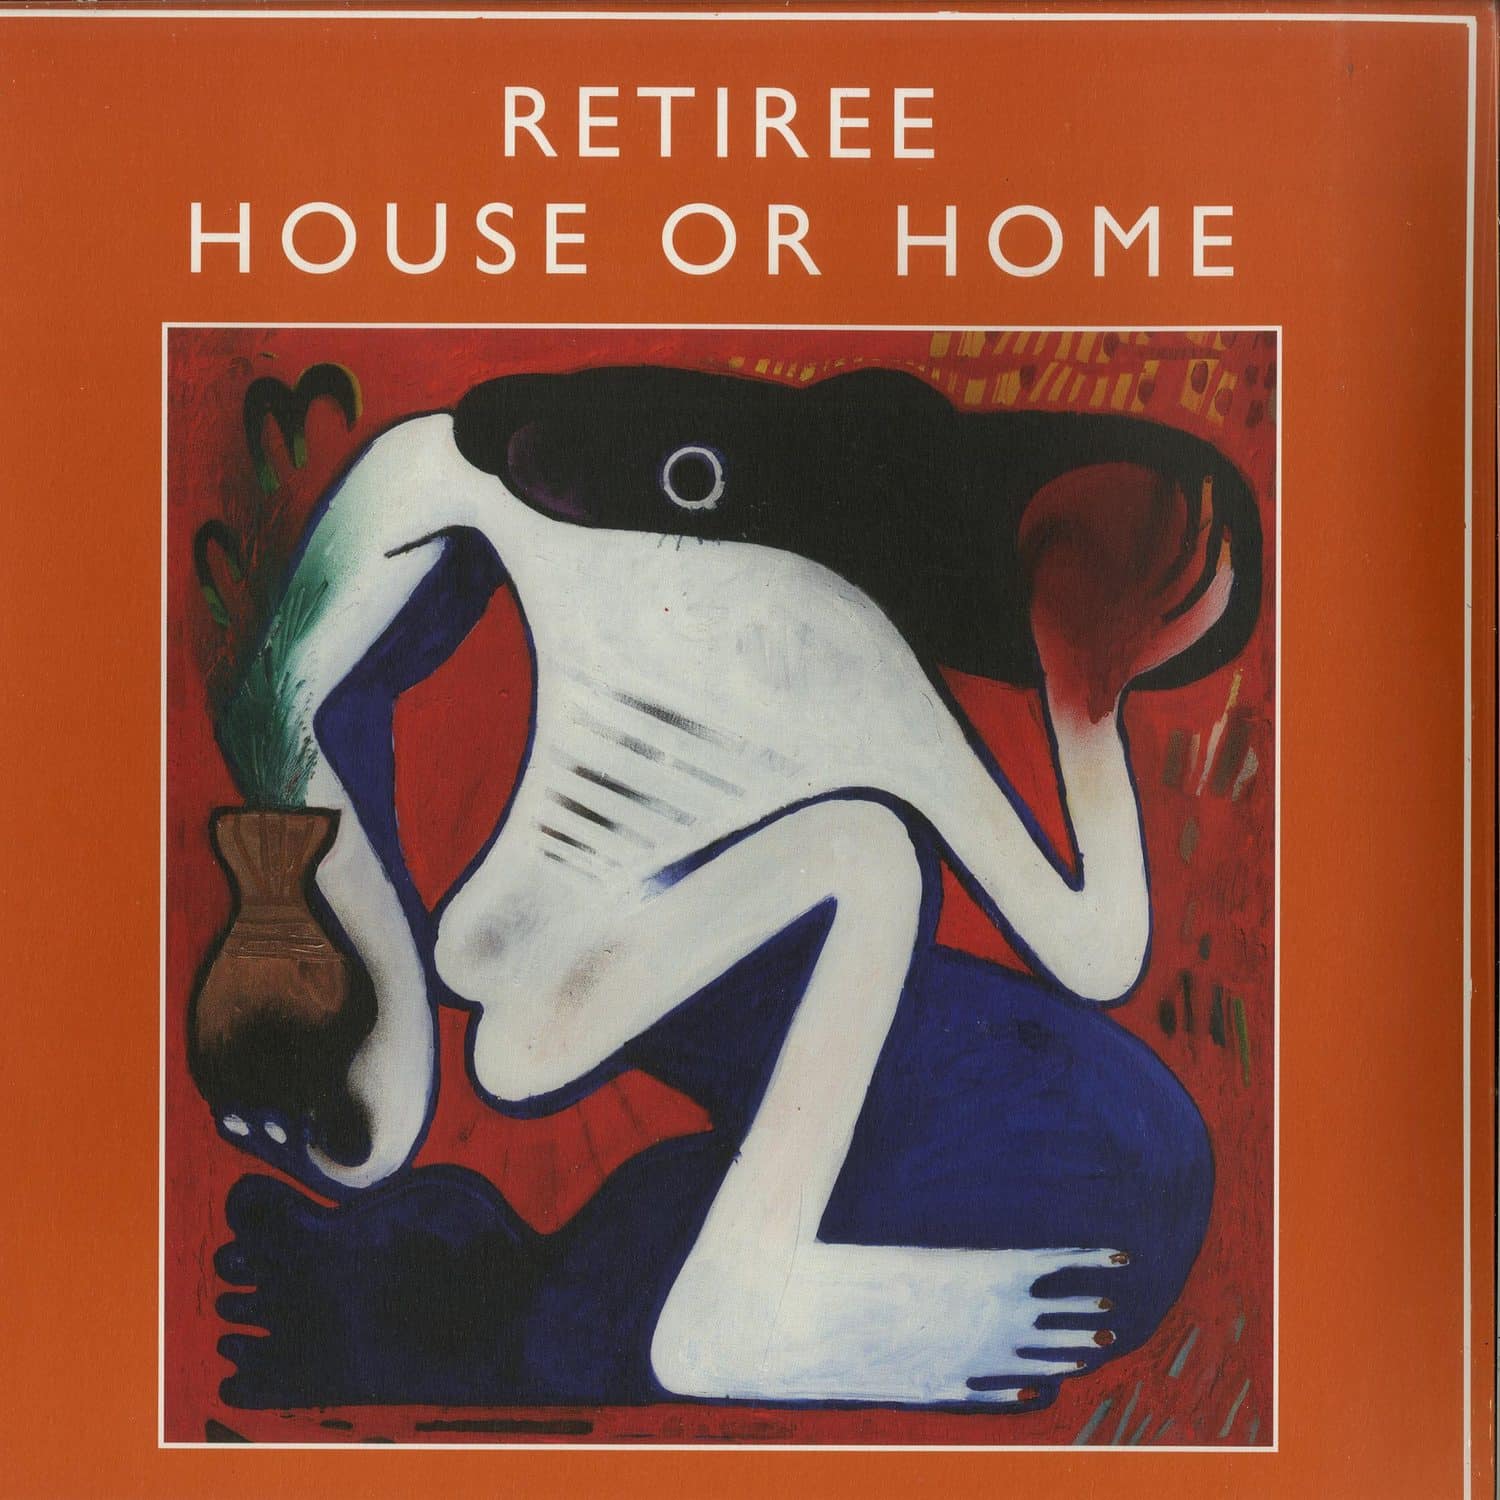 Retiree - HOUSE OR HOME